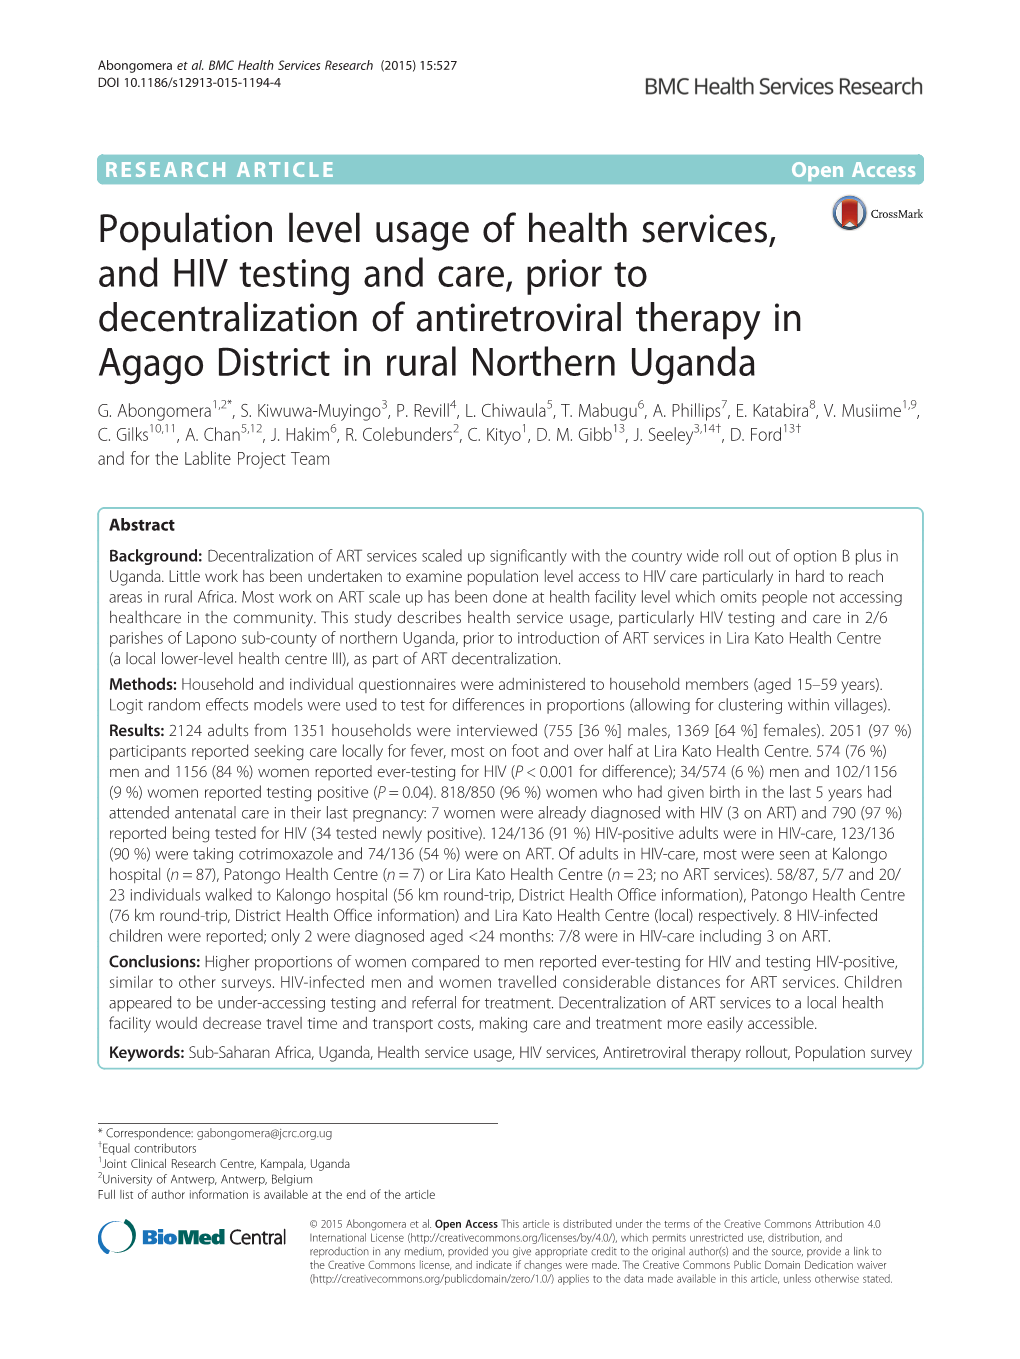 Population Level Usage of Health Services, and HIV Testing and Care, Prior to Decentralization of Antiretroviral Therapy in Agago District in Rural Northern Uganda G